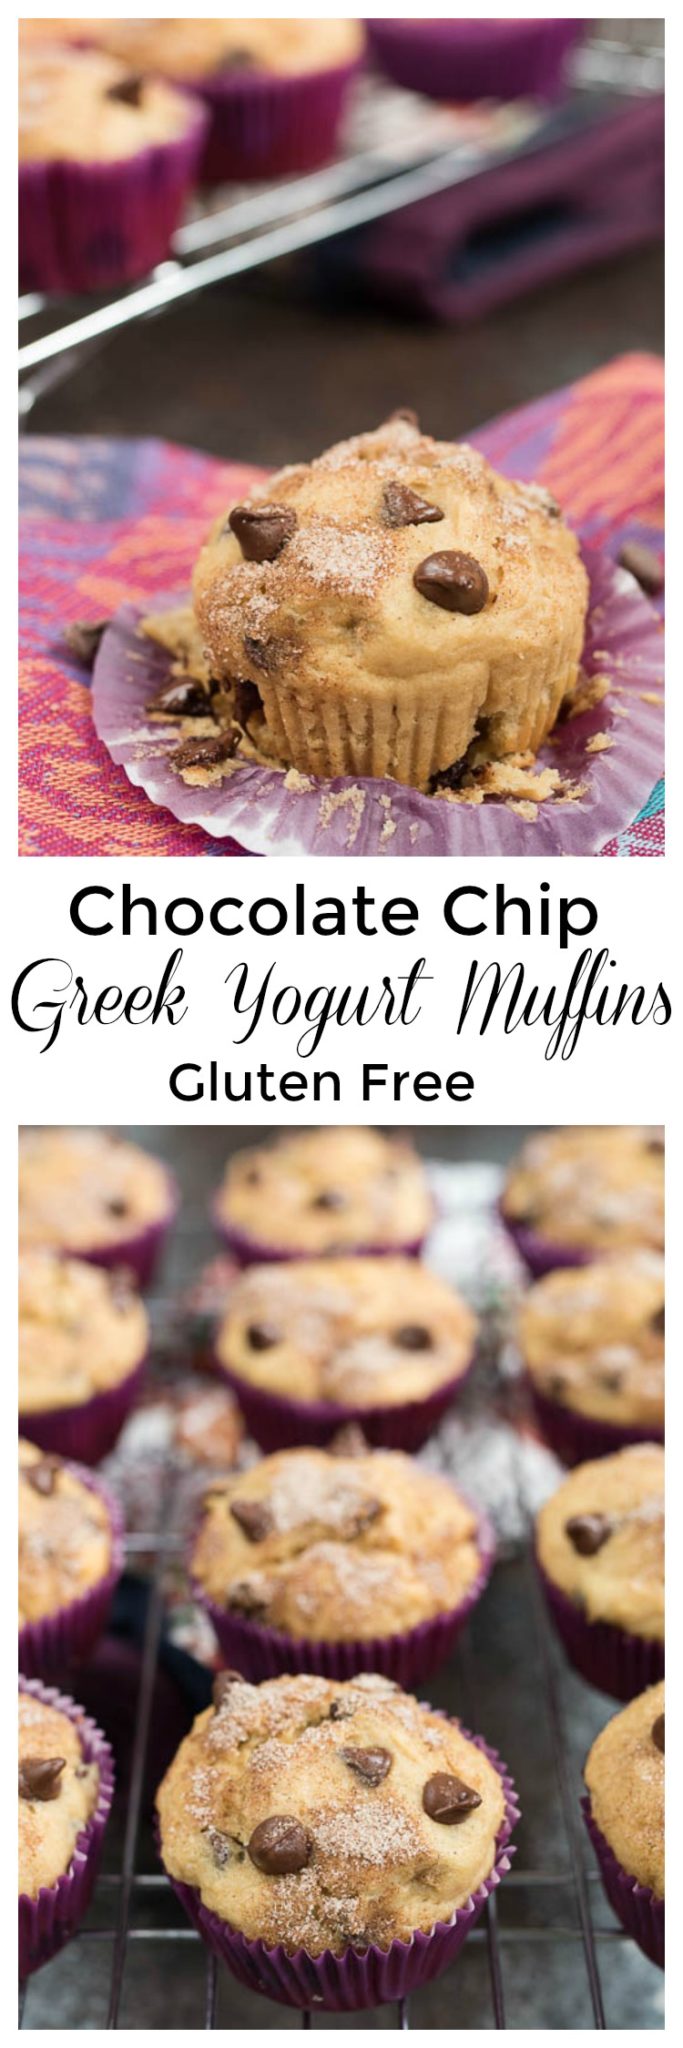 Chocolate Chip Greek Yogurt Muffins- a fun breakfast or snack for the kids, plus info on ways to get more Greek Yogurt into your child's diet! #glutenfree | www.nutritiouseats.com